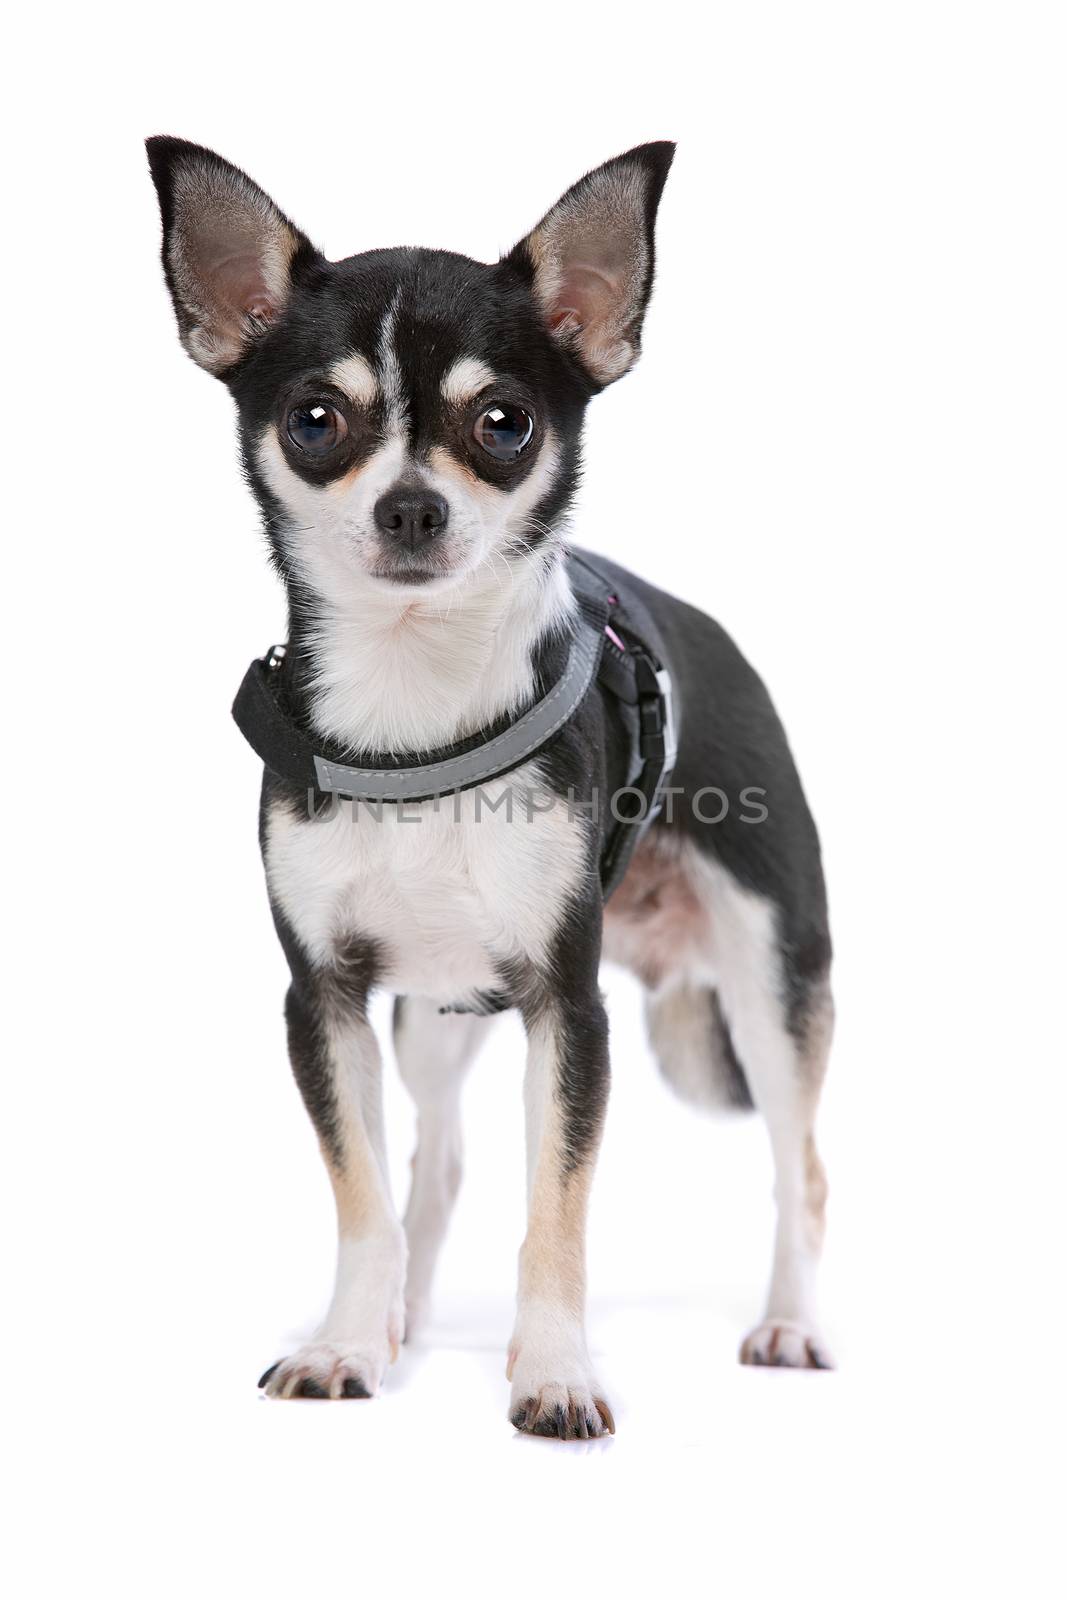 Black and White Chihuahua dog in front of a white background